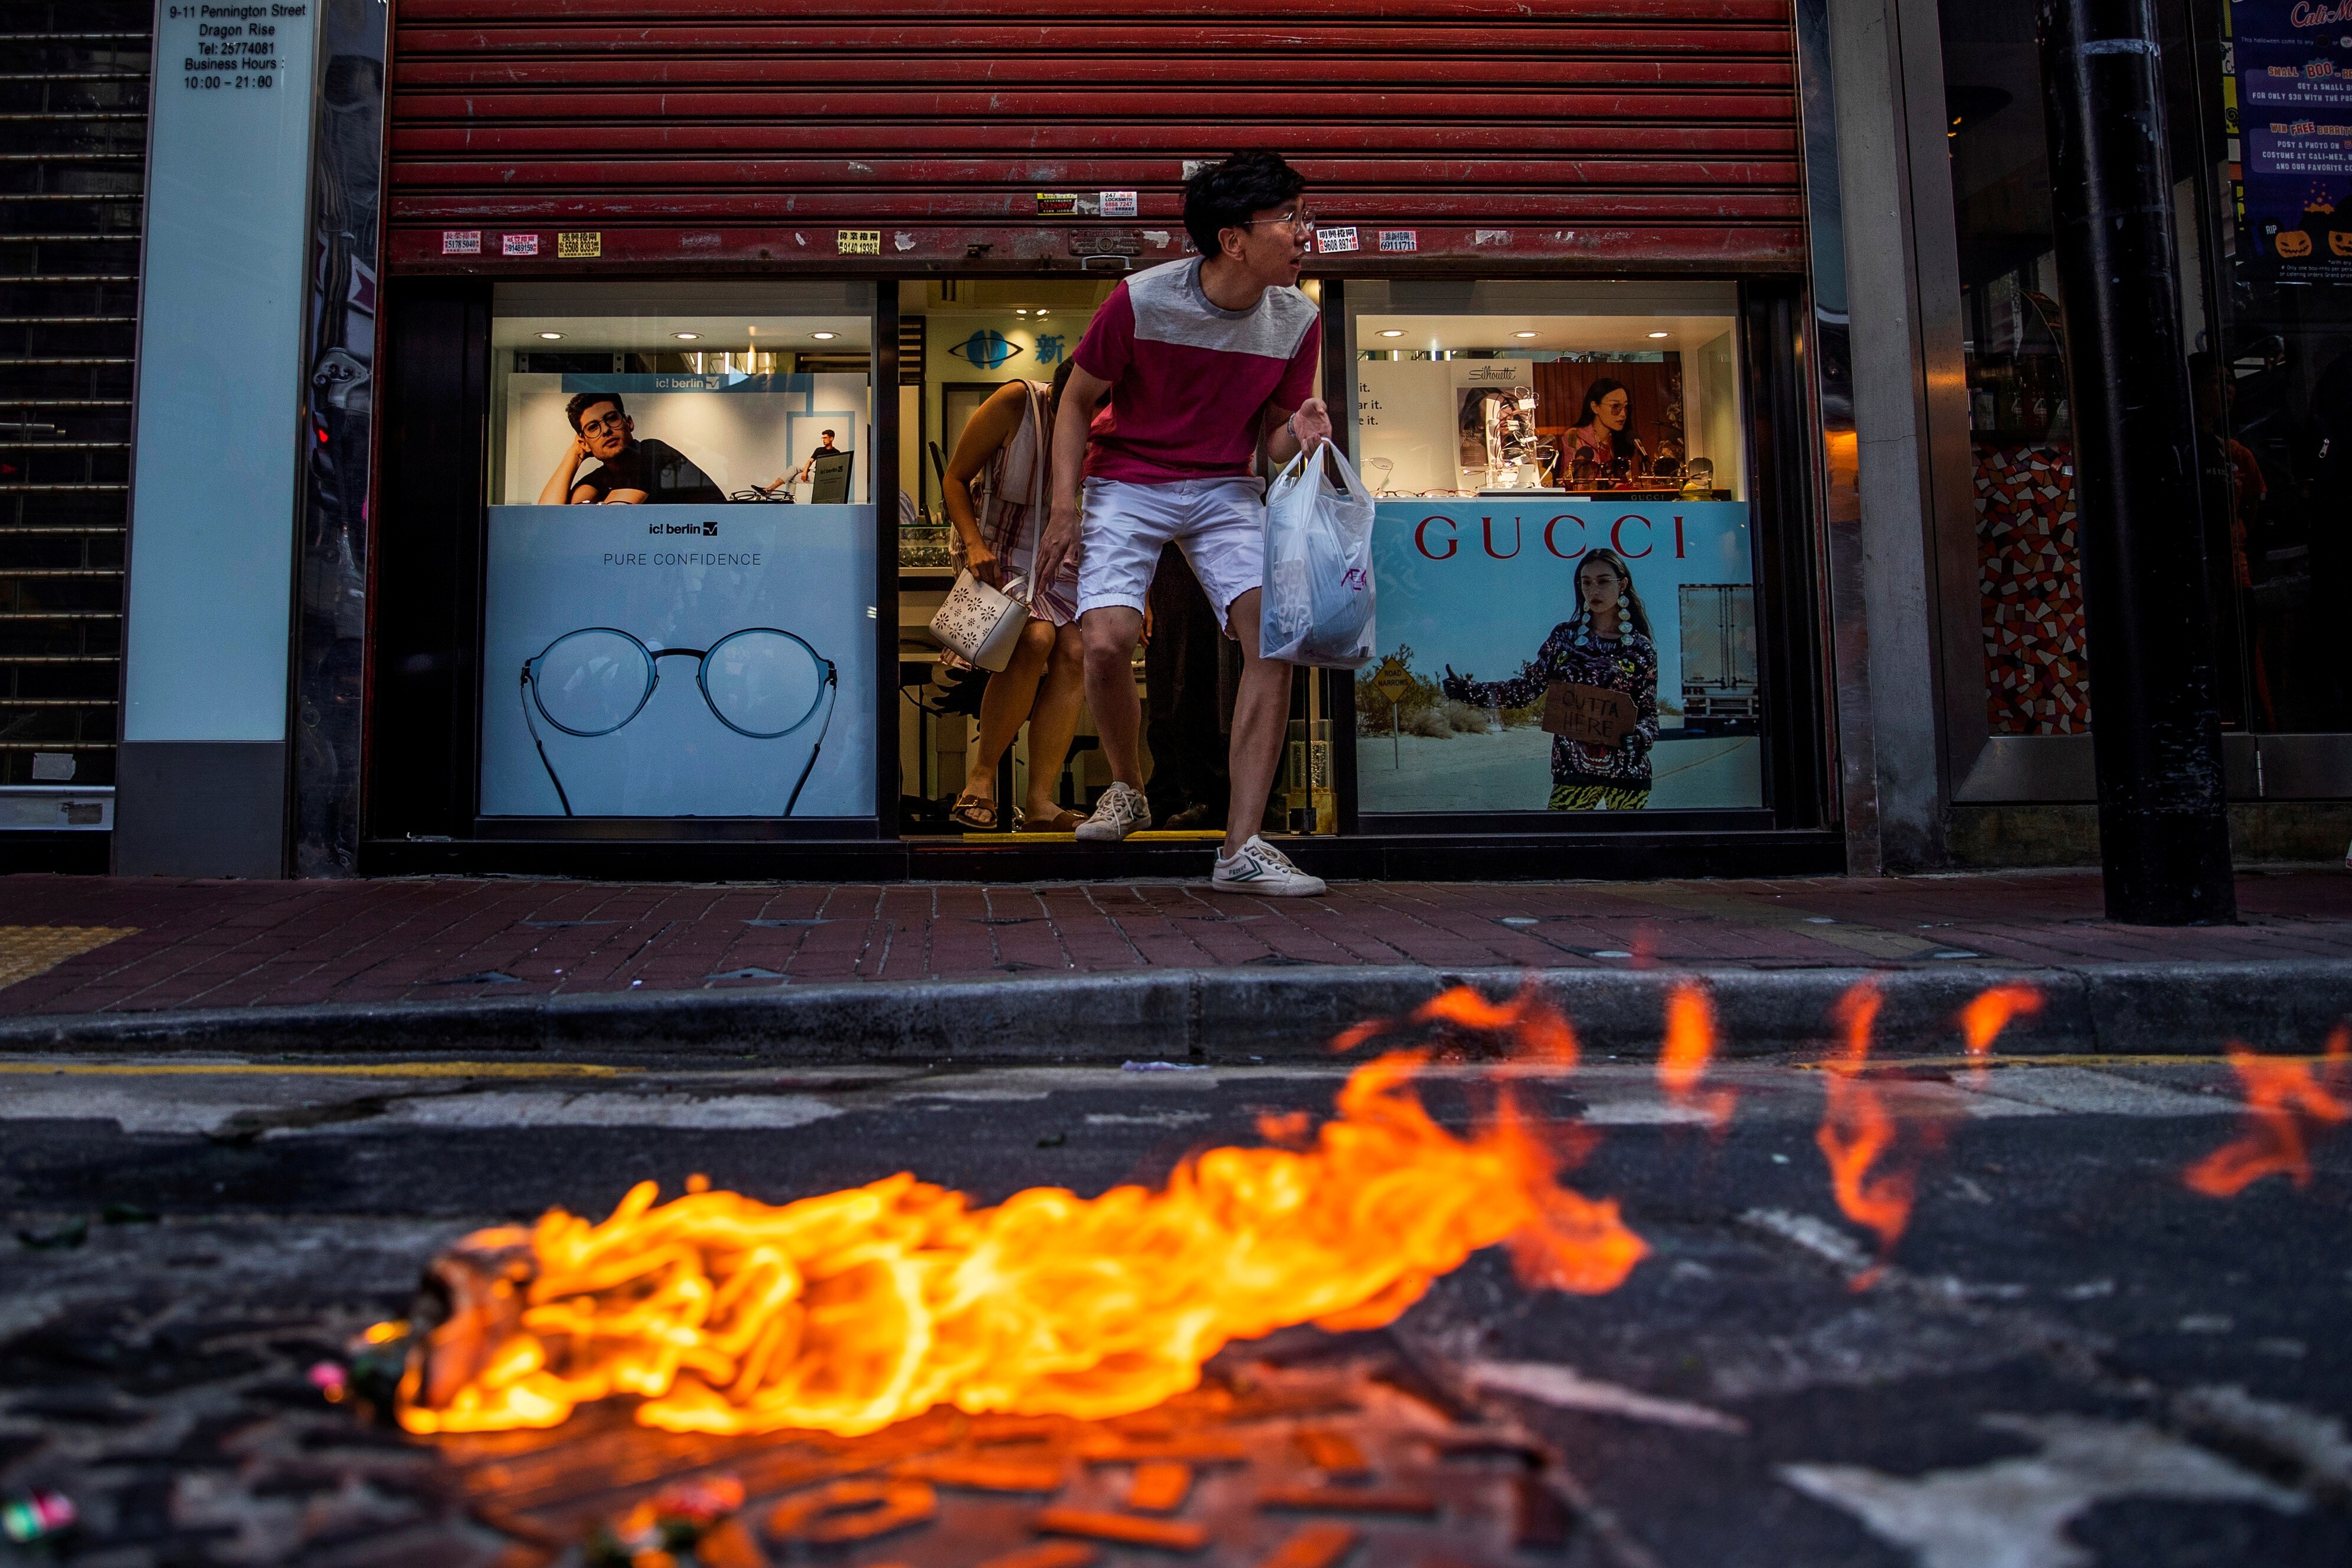 Customers cautiously exit a store in Hong Kong, as a Molotov cocktail burns on the street during a clash between protesters and riot police on November 2, 2019. Photo: Reuters